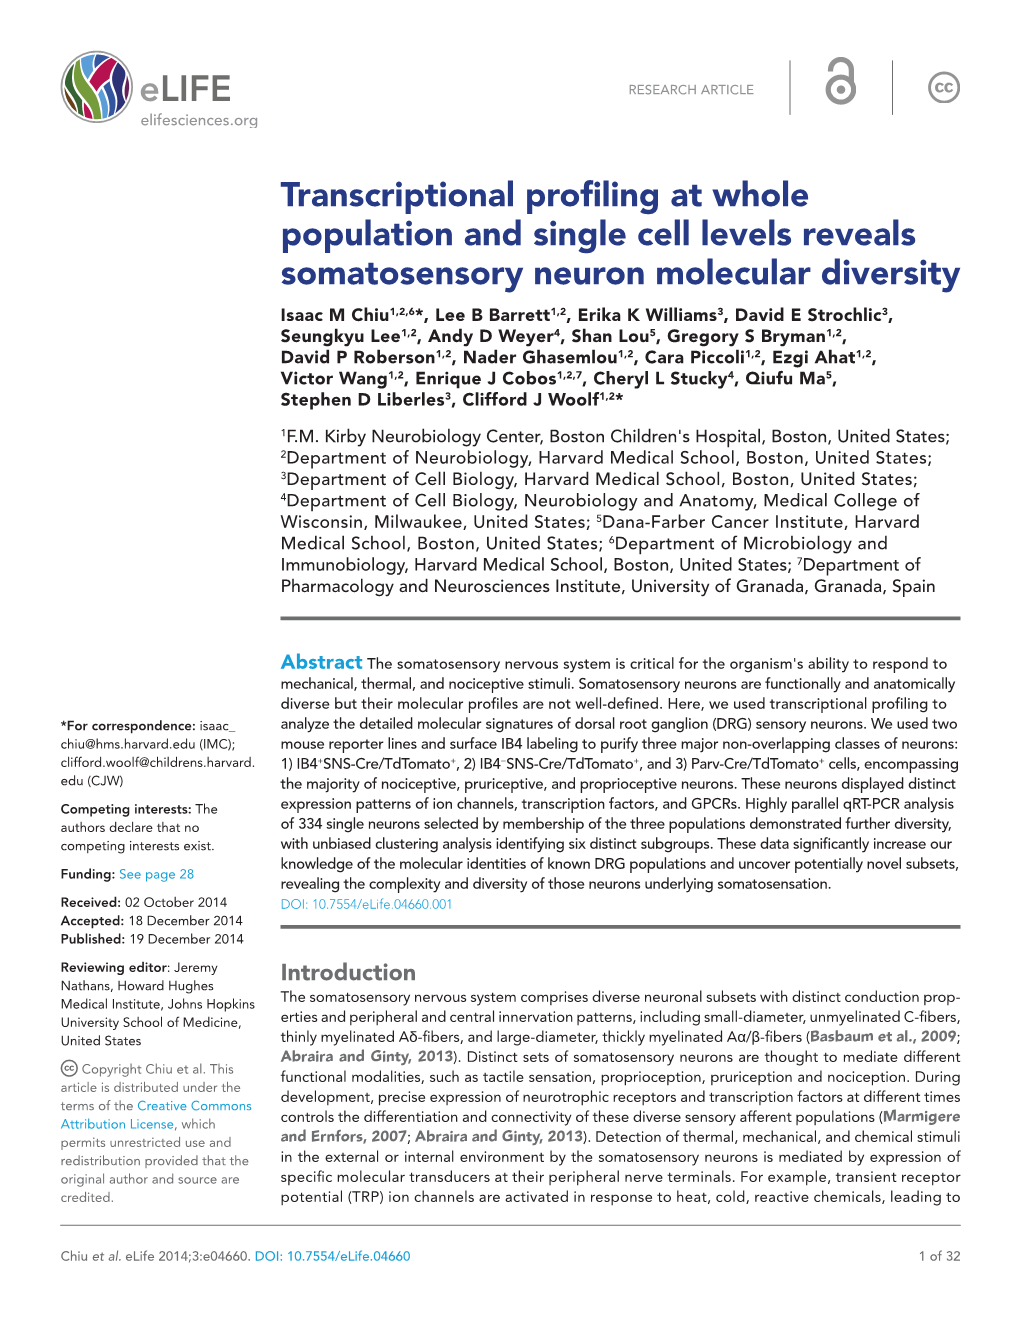 Transcriptional Profiling at Whole Population and Single Cell